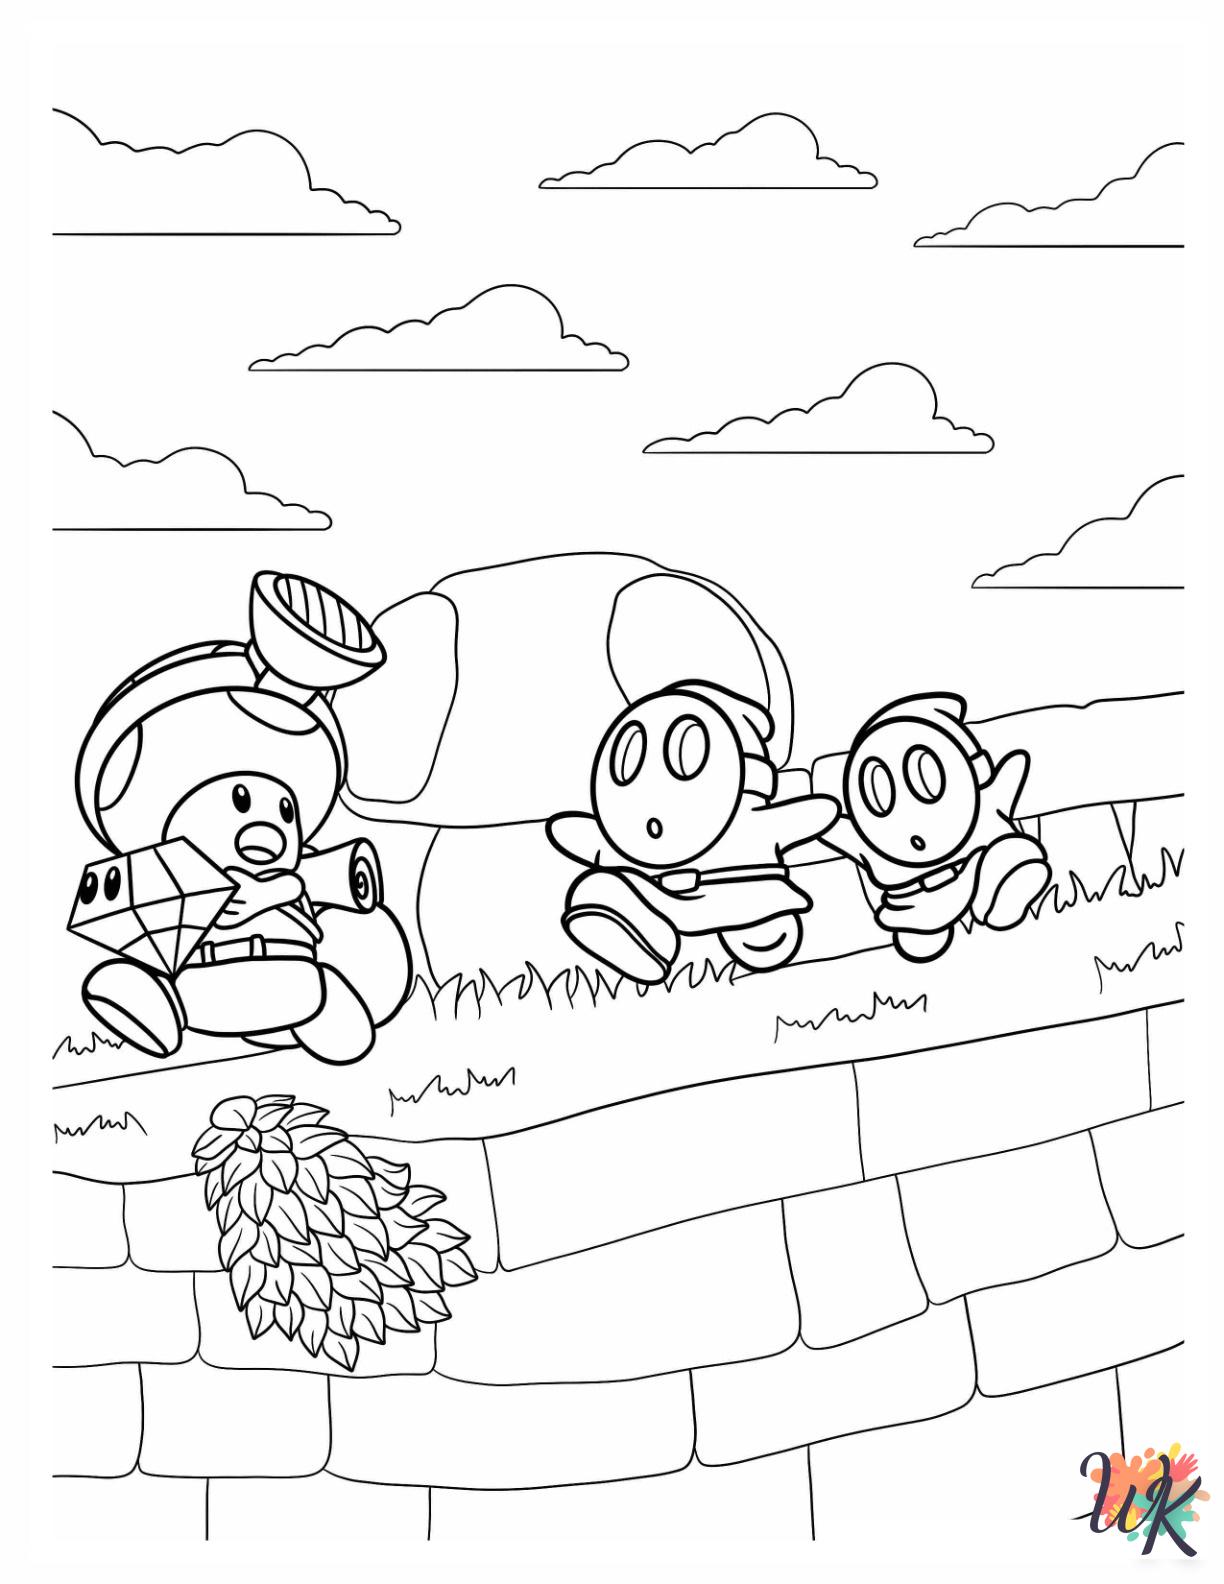 Shy Guy coloring pages to print